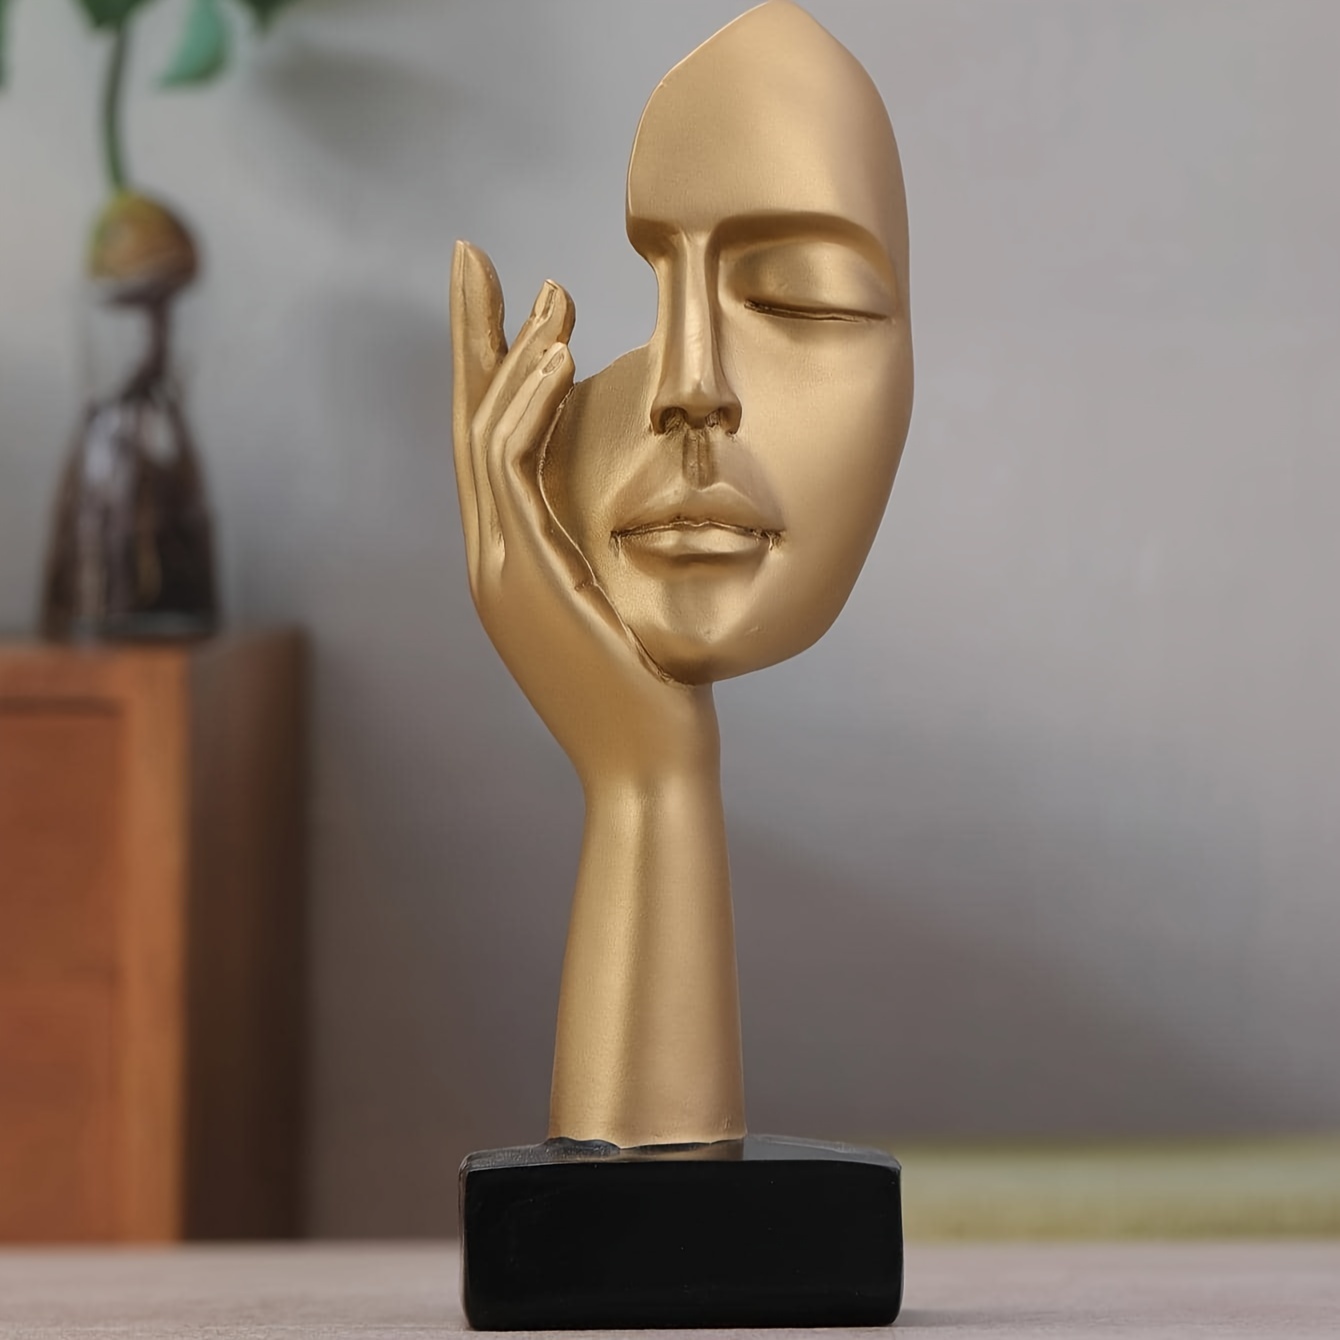 

1pc Abstract Faceless Hand Sculpture, Resin Decorative Figurine, 6.69 Inches Tall With 2.17-inch Base, Home Decor, Artistic Display, Tabletop Decor, Modern Design, Golden Finish